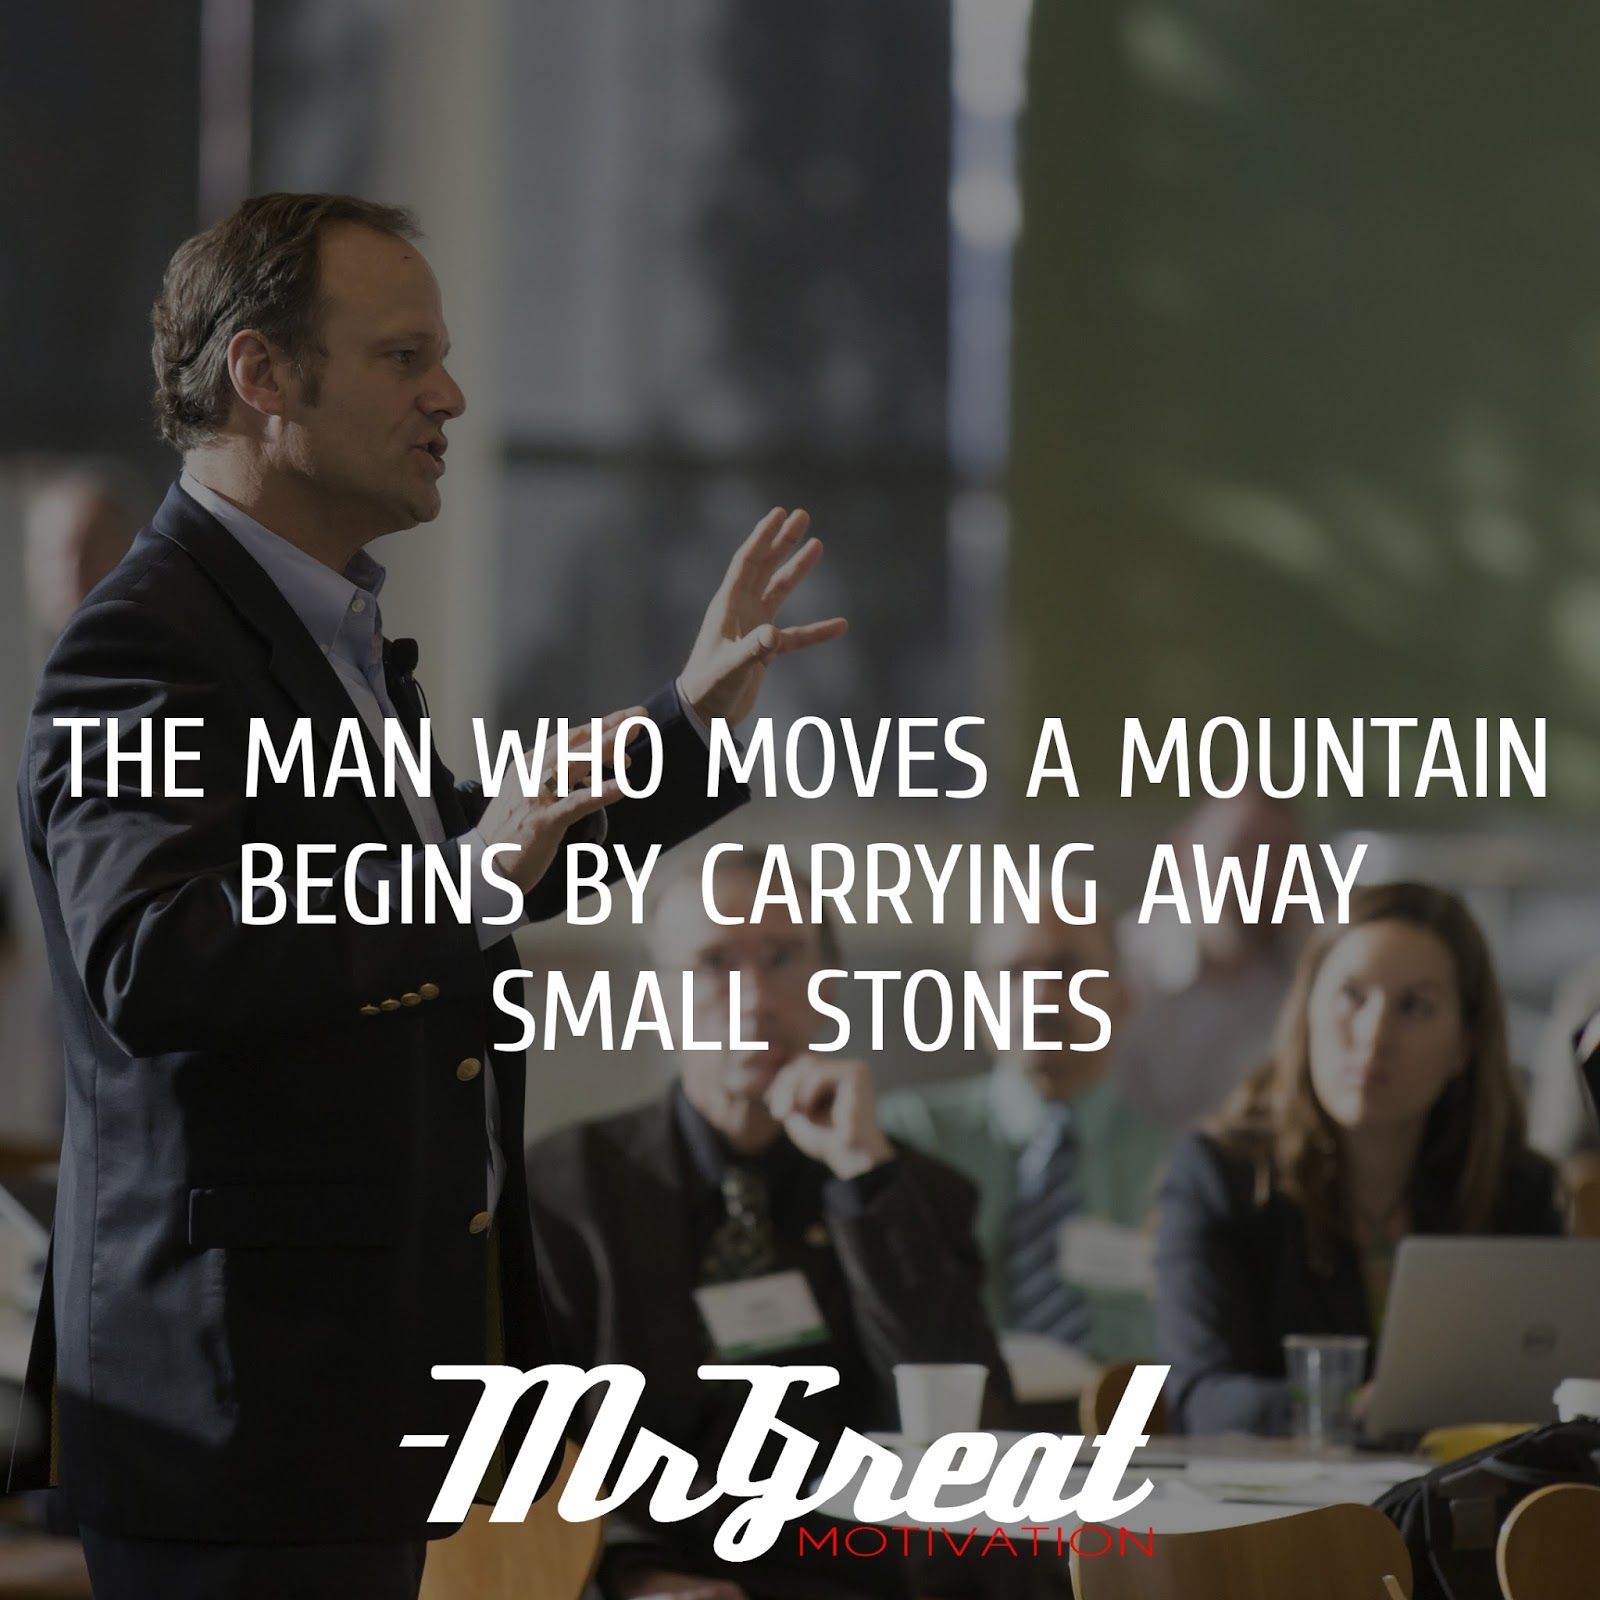 THE MAN WHO MOVES A MOUNTAIN BEGINS BY CARRYING AWAY SMALL STONES